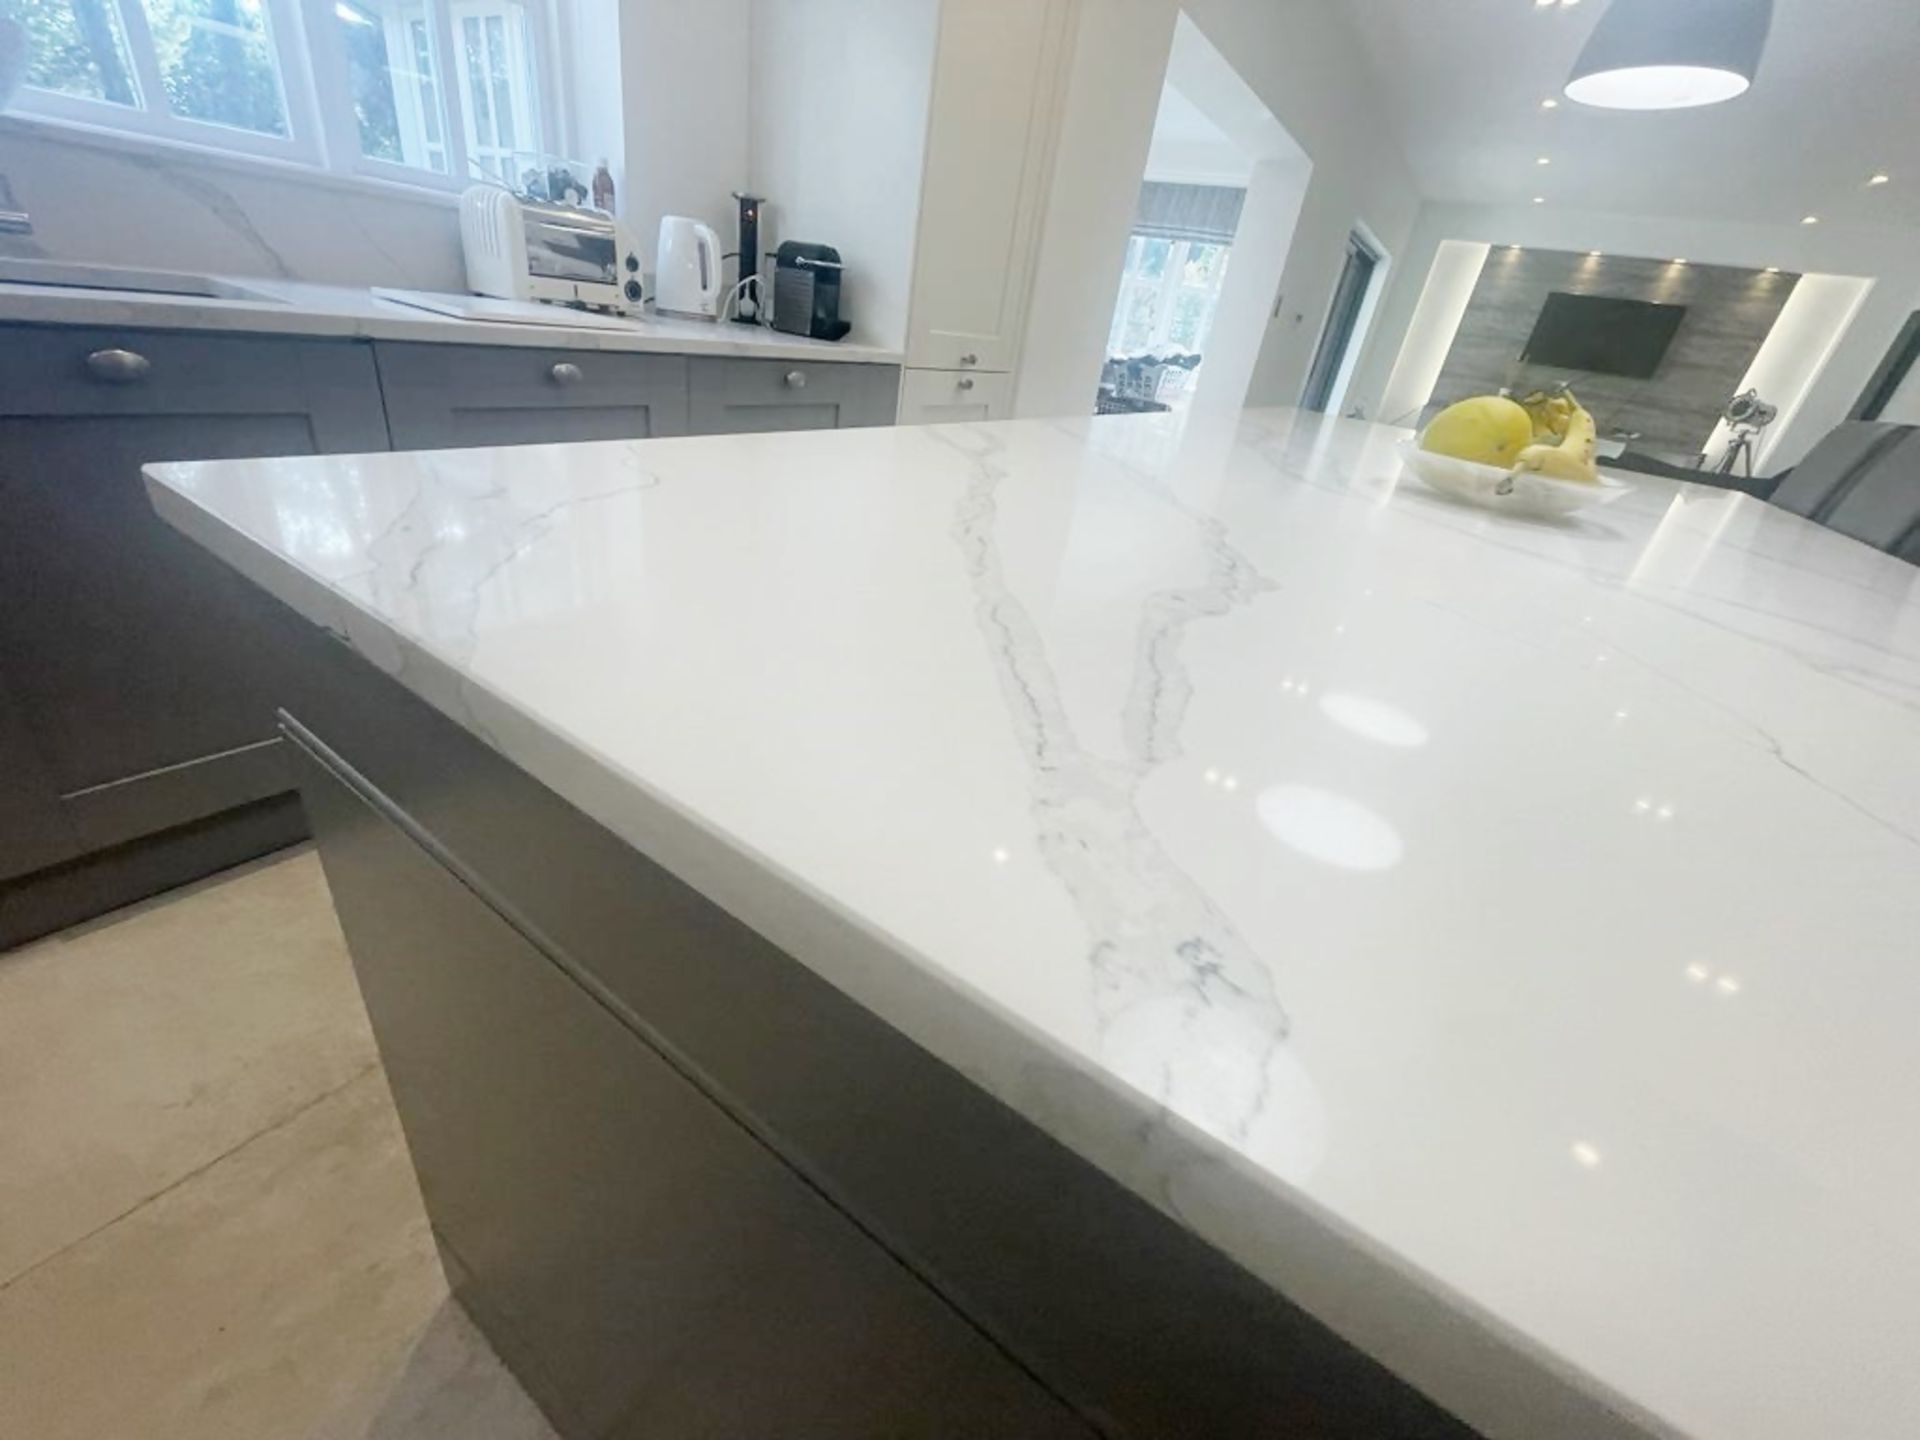 1 x SIEMATIC Bespoke Shaker-style Fitted Kitchen, Utility Room, Appliances & Modern Quartz Surfaces - Image 74 of 99